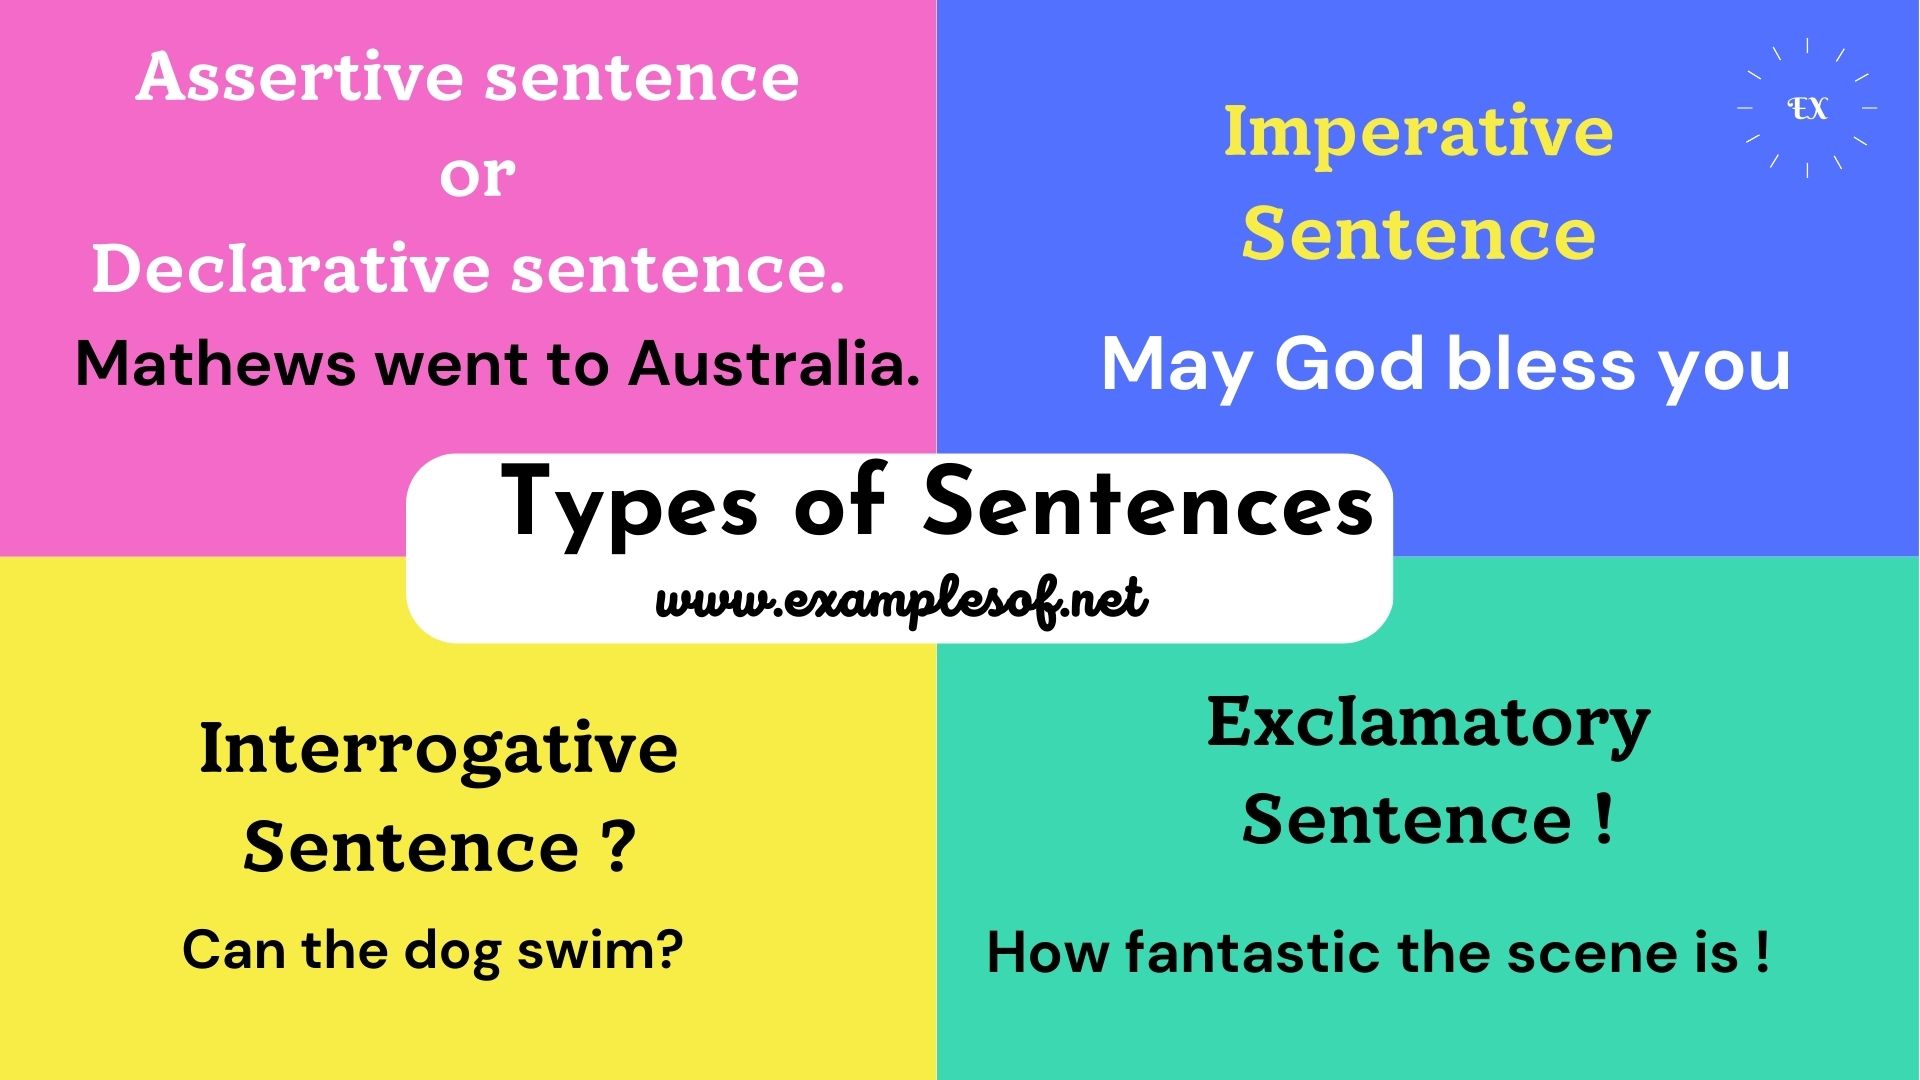 Types of Sentences- Examples of Assertive or Declarative Sentence -Imperative Sentence- Interrogative Sentence -Exclamatory Sentence